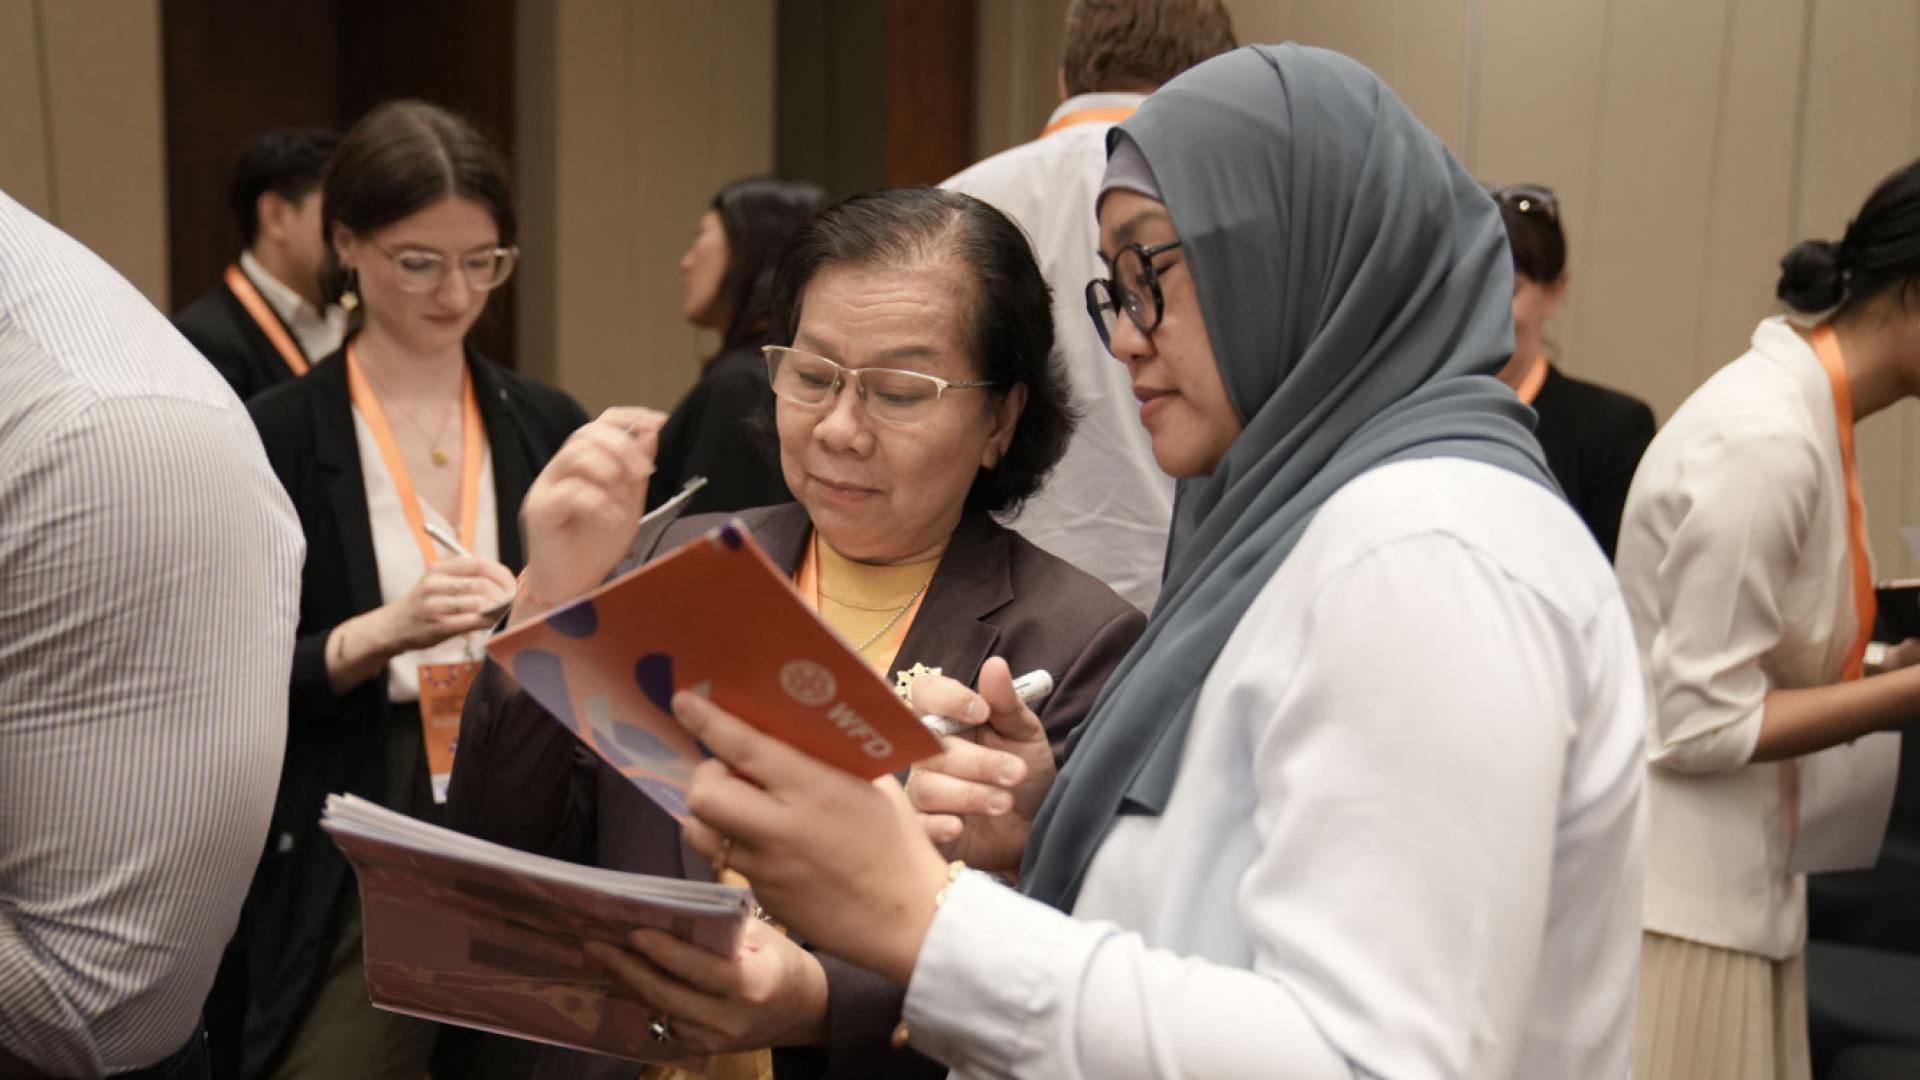 Two women inspecting democracy action partnership materials